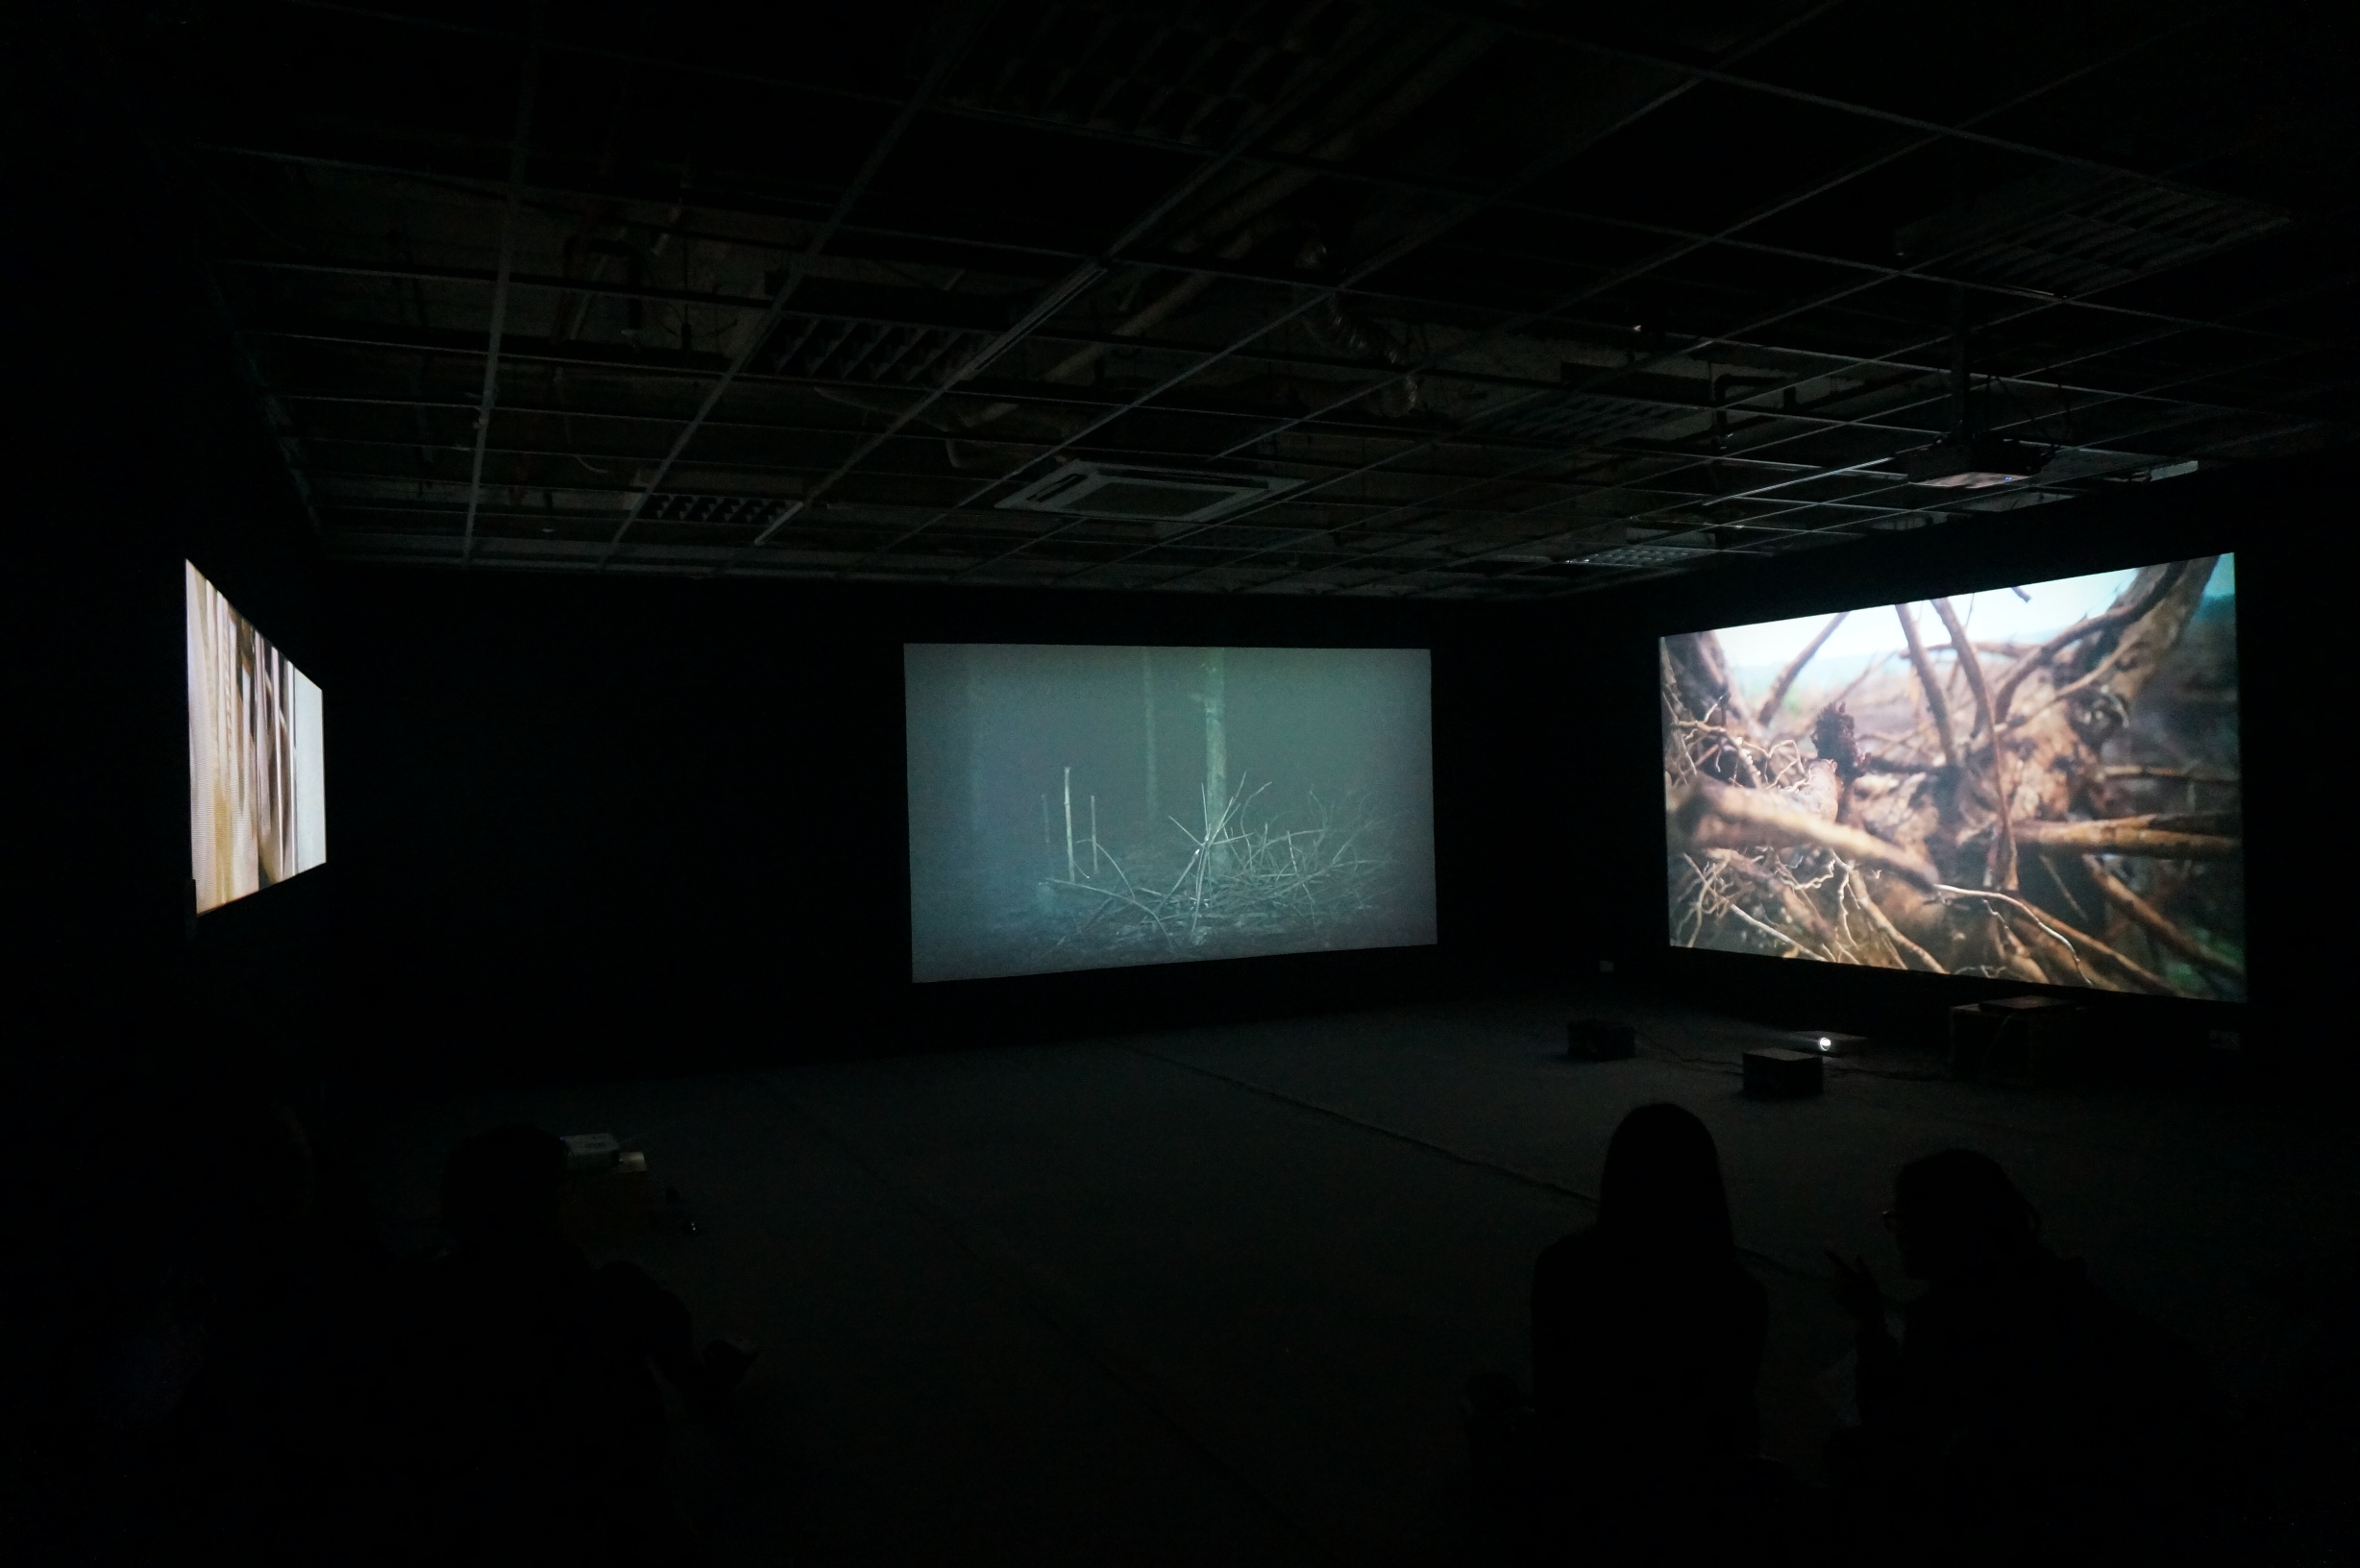 Black, Red and White<br> 
Video installation: 3 channels<br>
Nguyen Phuong Linh, 2015-16